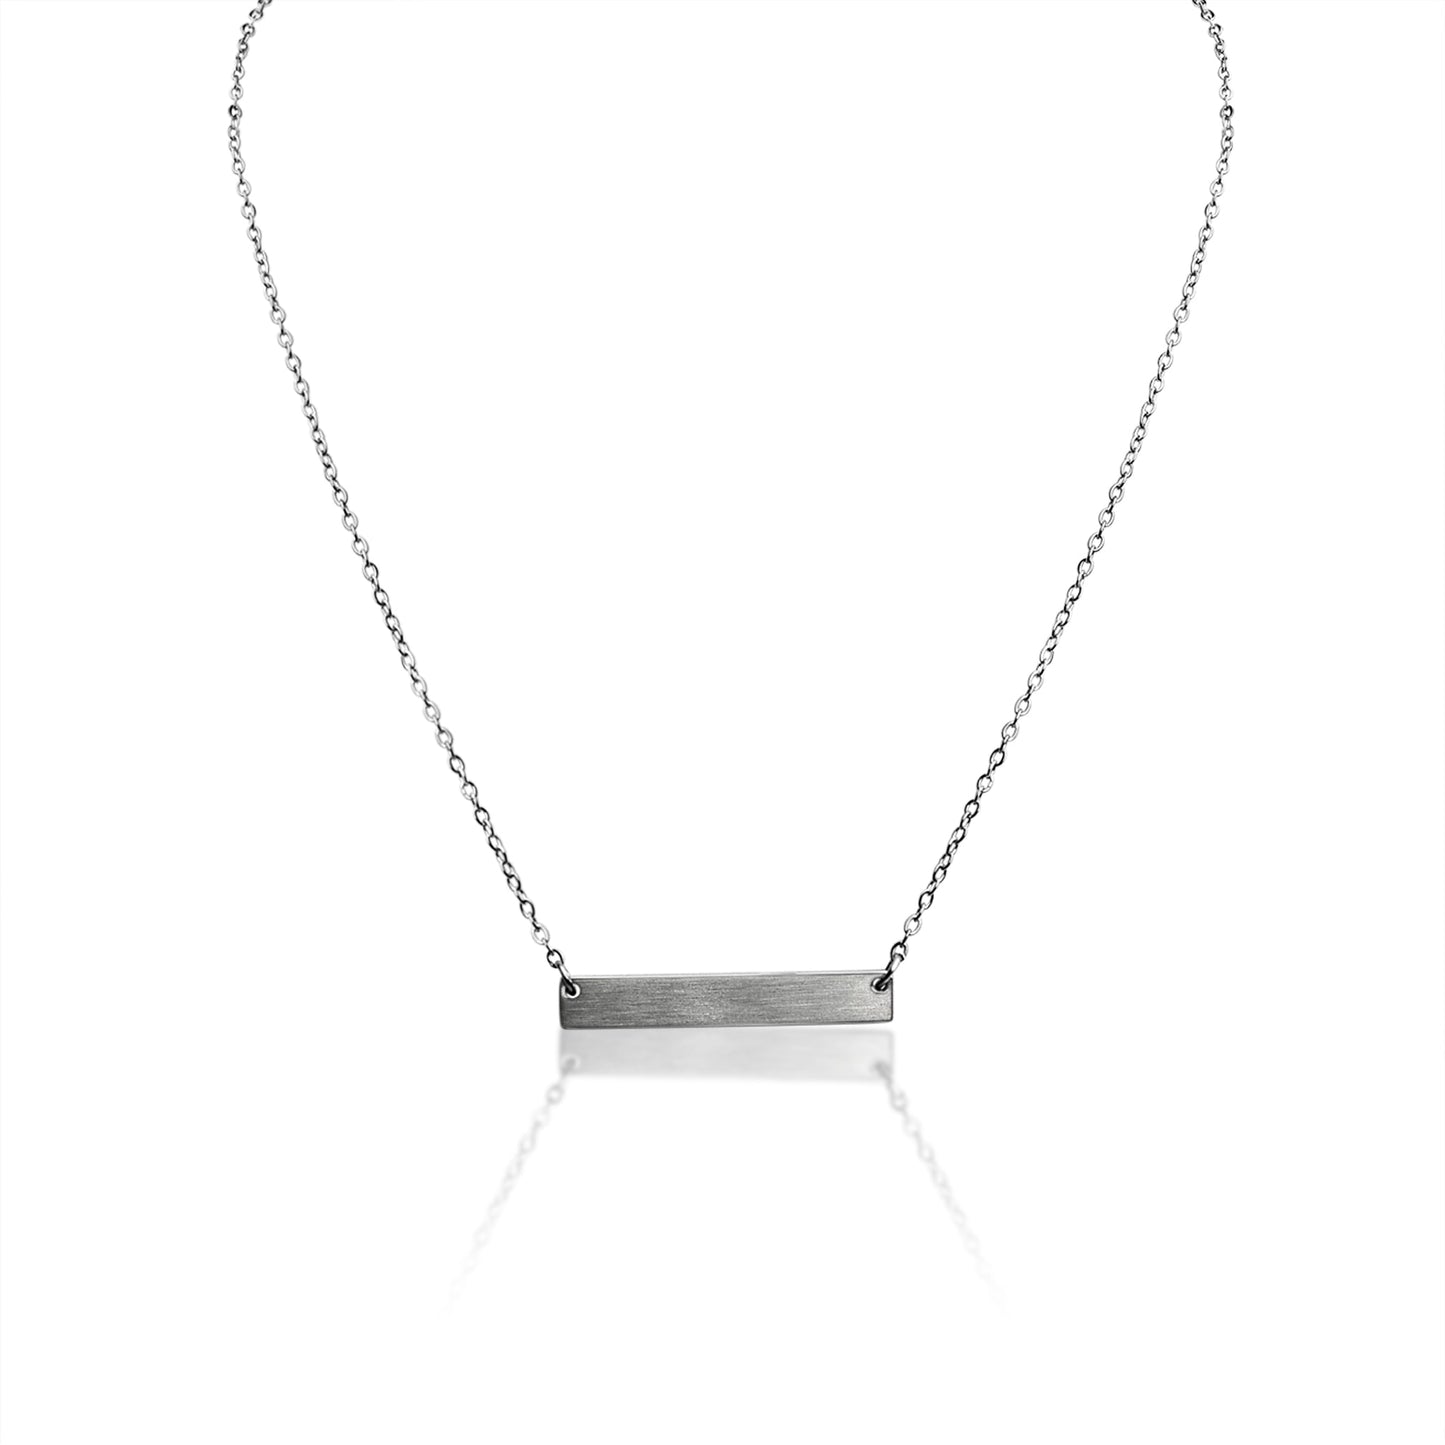 Blank Brushed Bar Stainless Steel Necklace / SBB0018